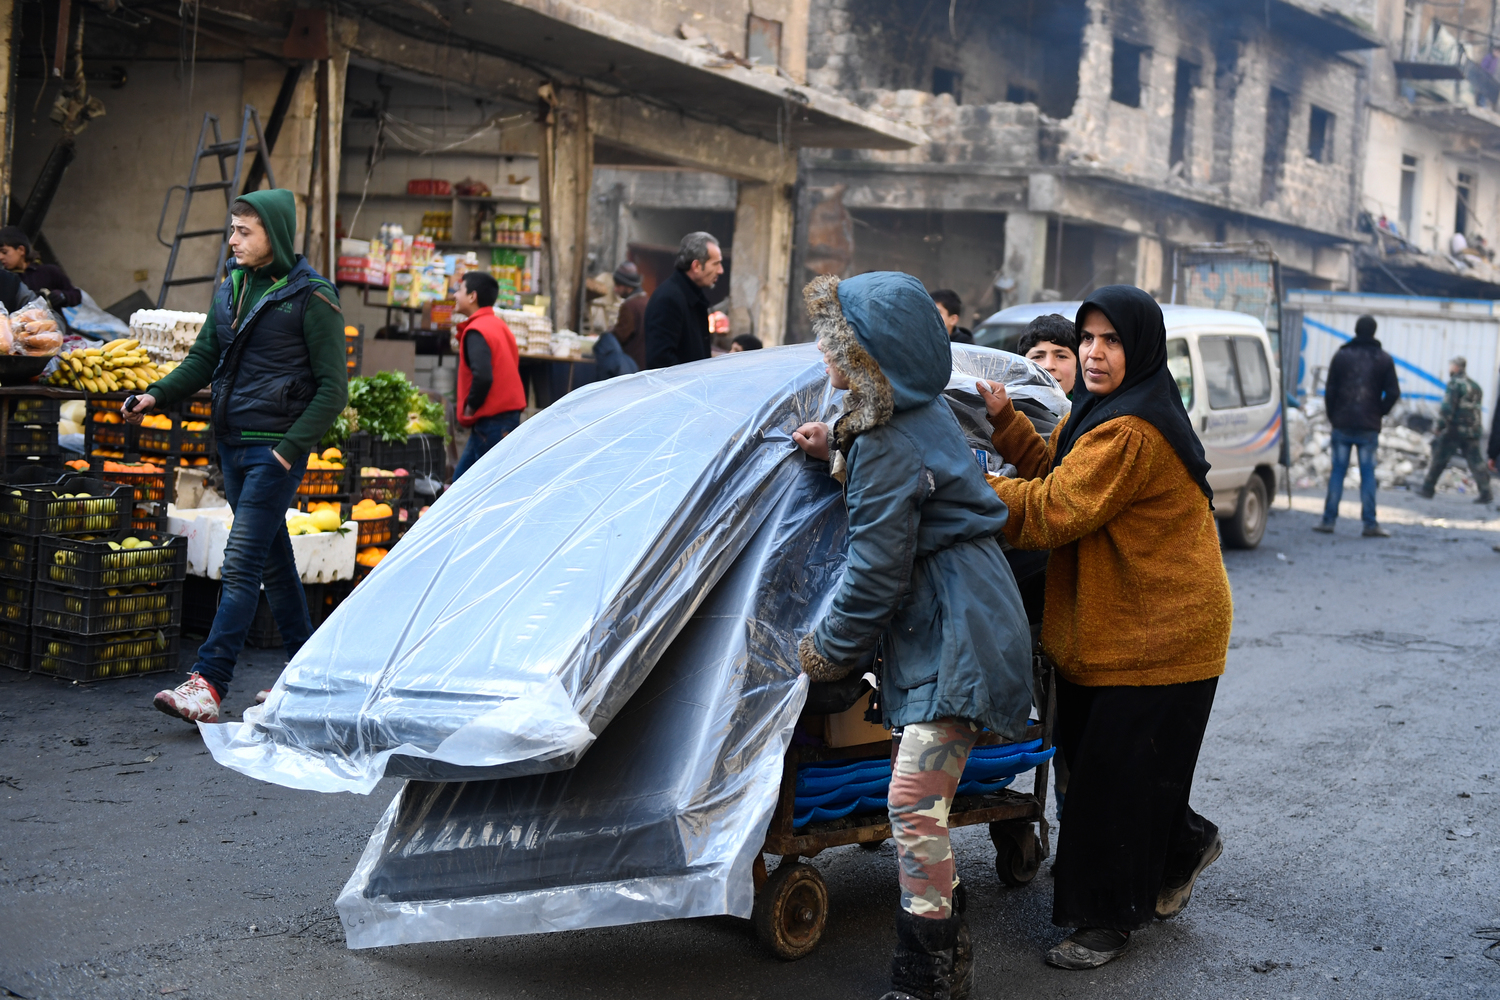 Syria. Renewed hope as the UN scales up its response in Aleppo